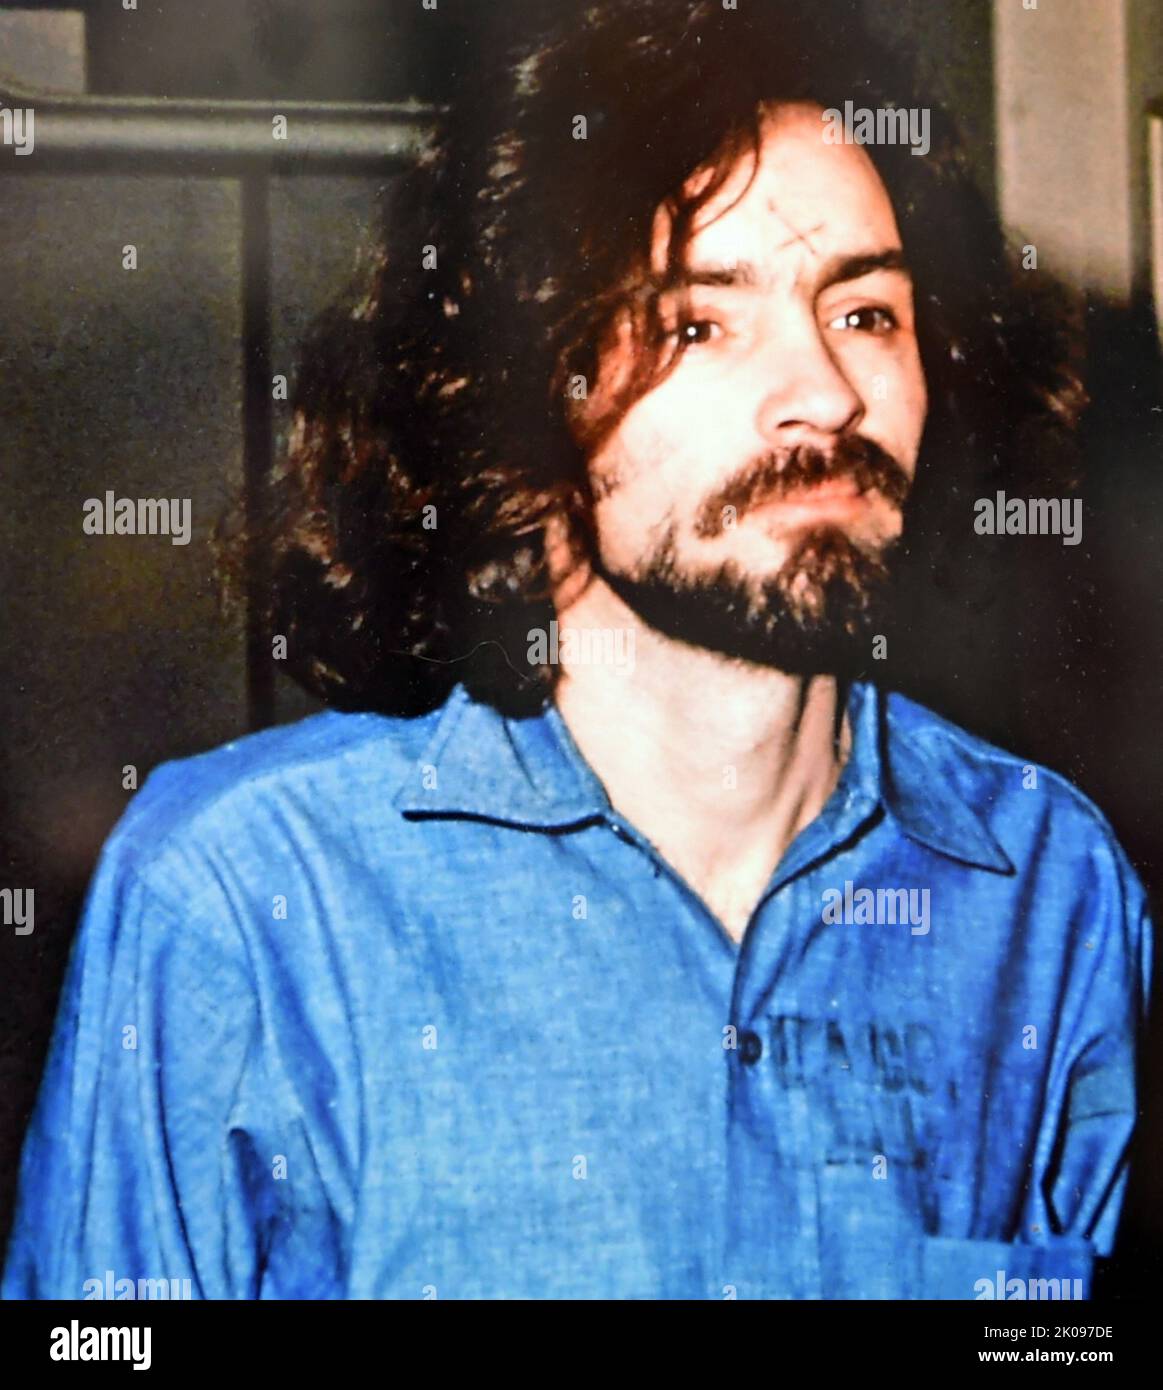 Charles Milles Manson (1934 - 2017) American criminal who led the Manson Family, a cult based in California, in the late 1960s. Some of the members committed a series of nine murders at four locations in July and August 1969. In 1971, Manson was convicted of first-degree murder and conspiracy to commit murder for the deaths of seven people, including the film actress Sharon Tate. Stock Photo